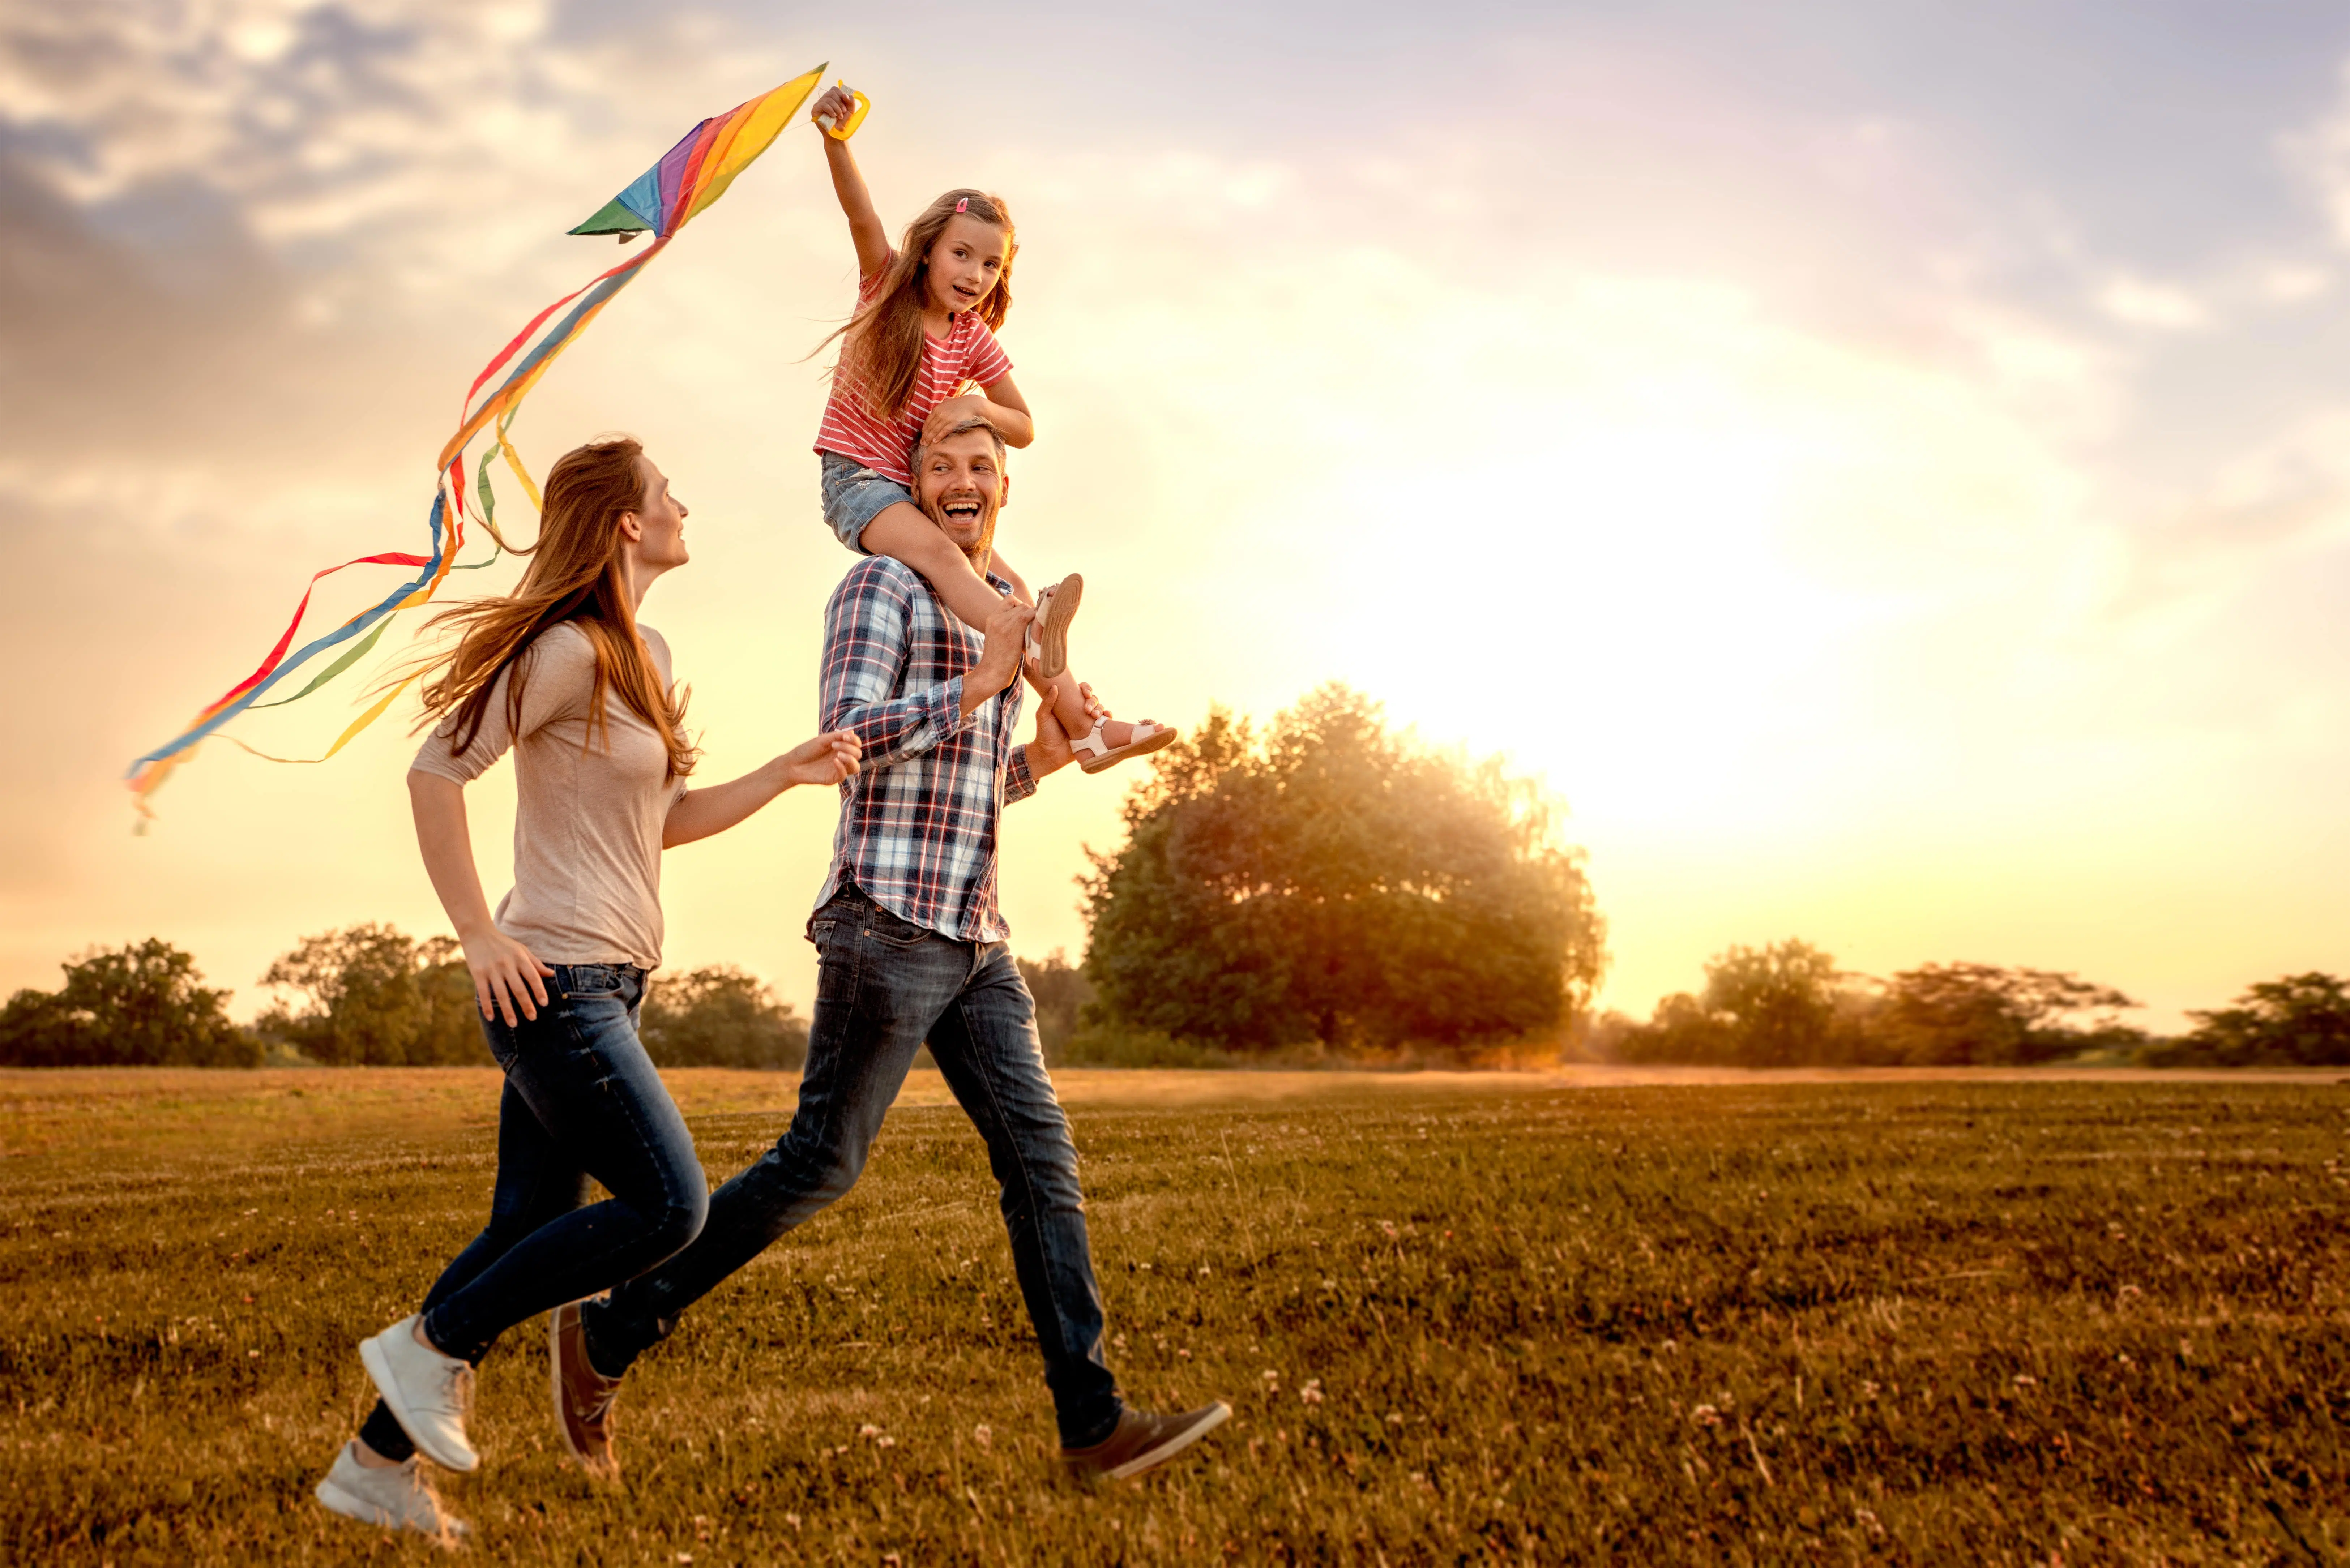 Happy Family Running Through A Field With A Kite To Represent Reflecting As A Fostering Agency